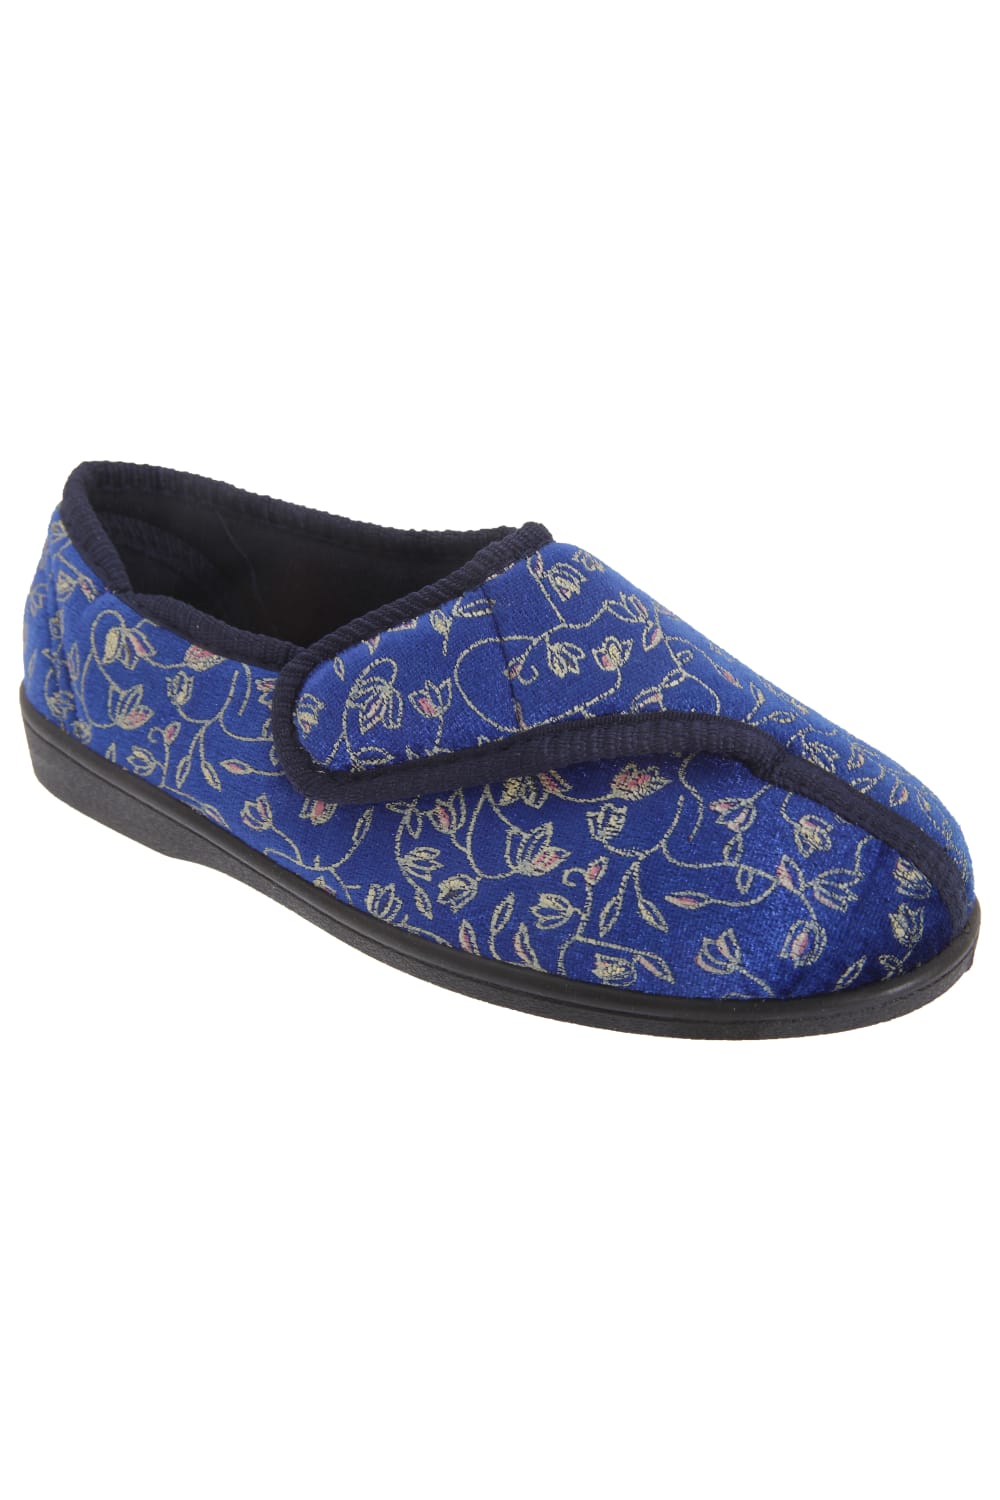 Womens/Ladies Janice Touch Fastening Floral Slippers - Navy Blue